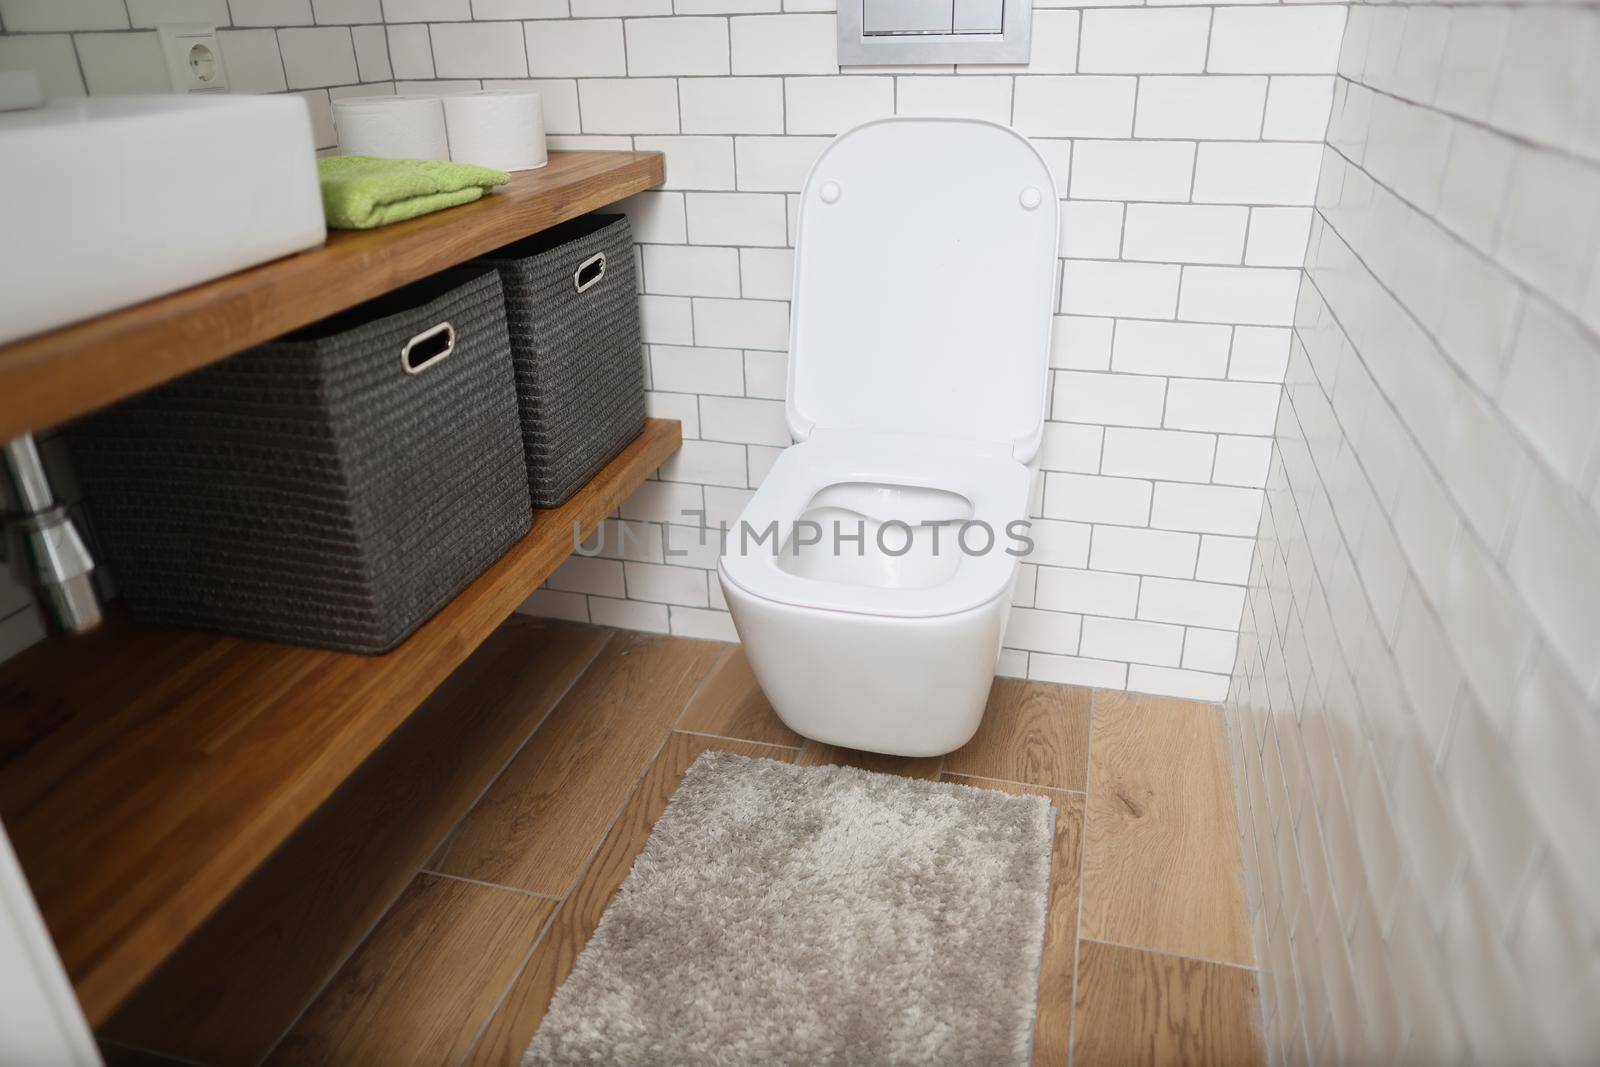 Portrait of modern bathroom interior with wooden shelves, white sink and toilet. Fresh interior, toilet paper, soap, decor. Renovation, restroom concept